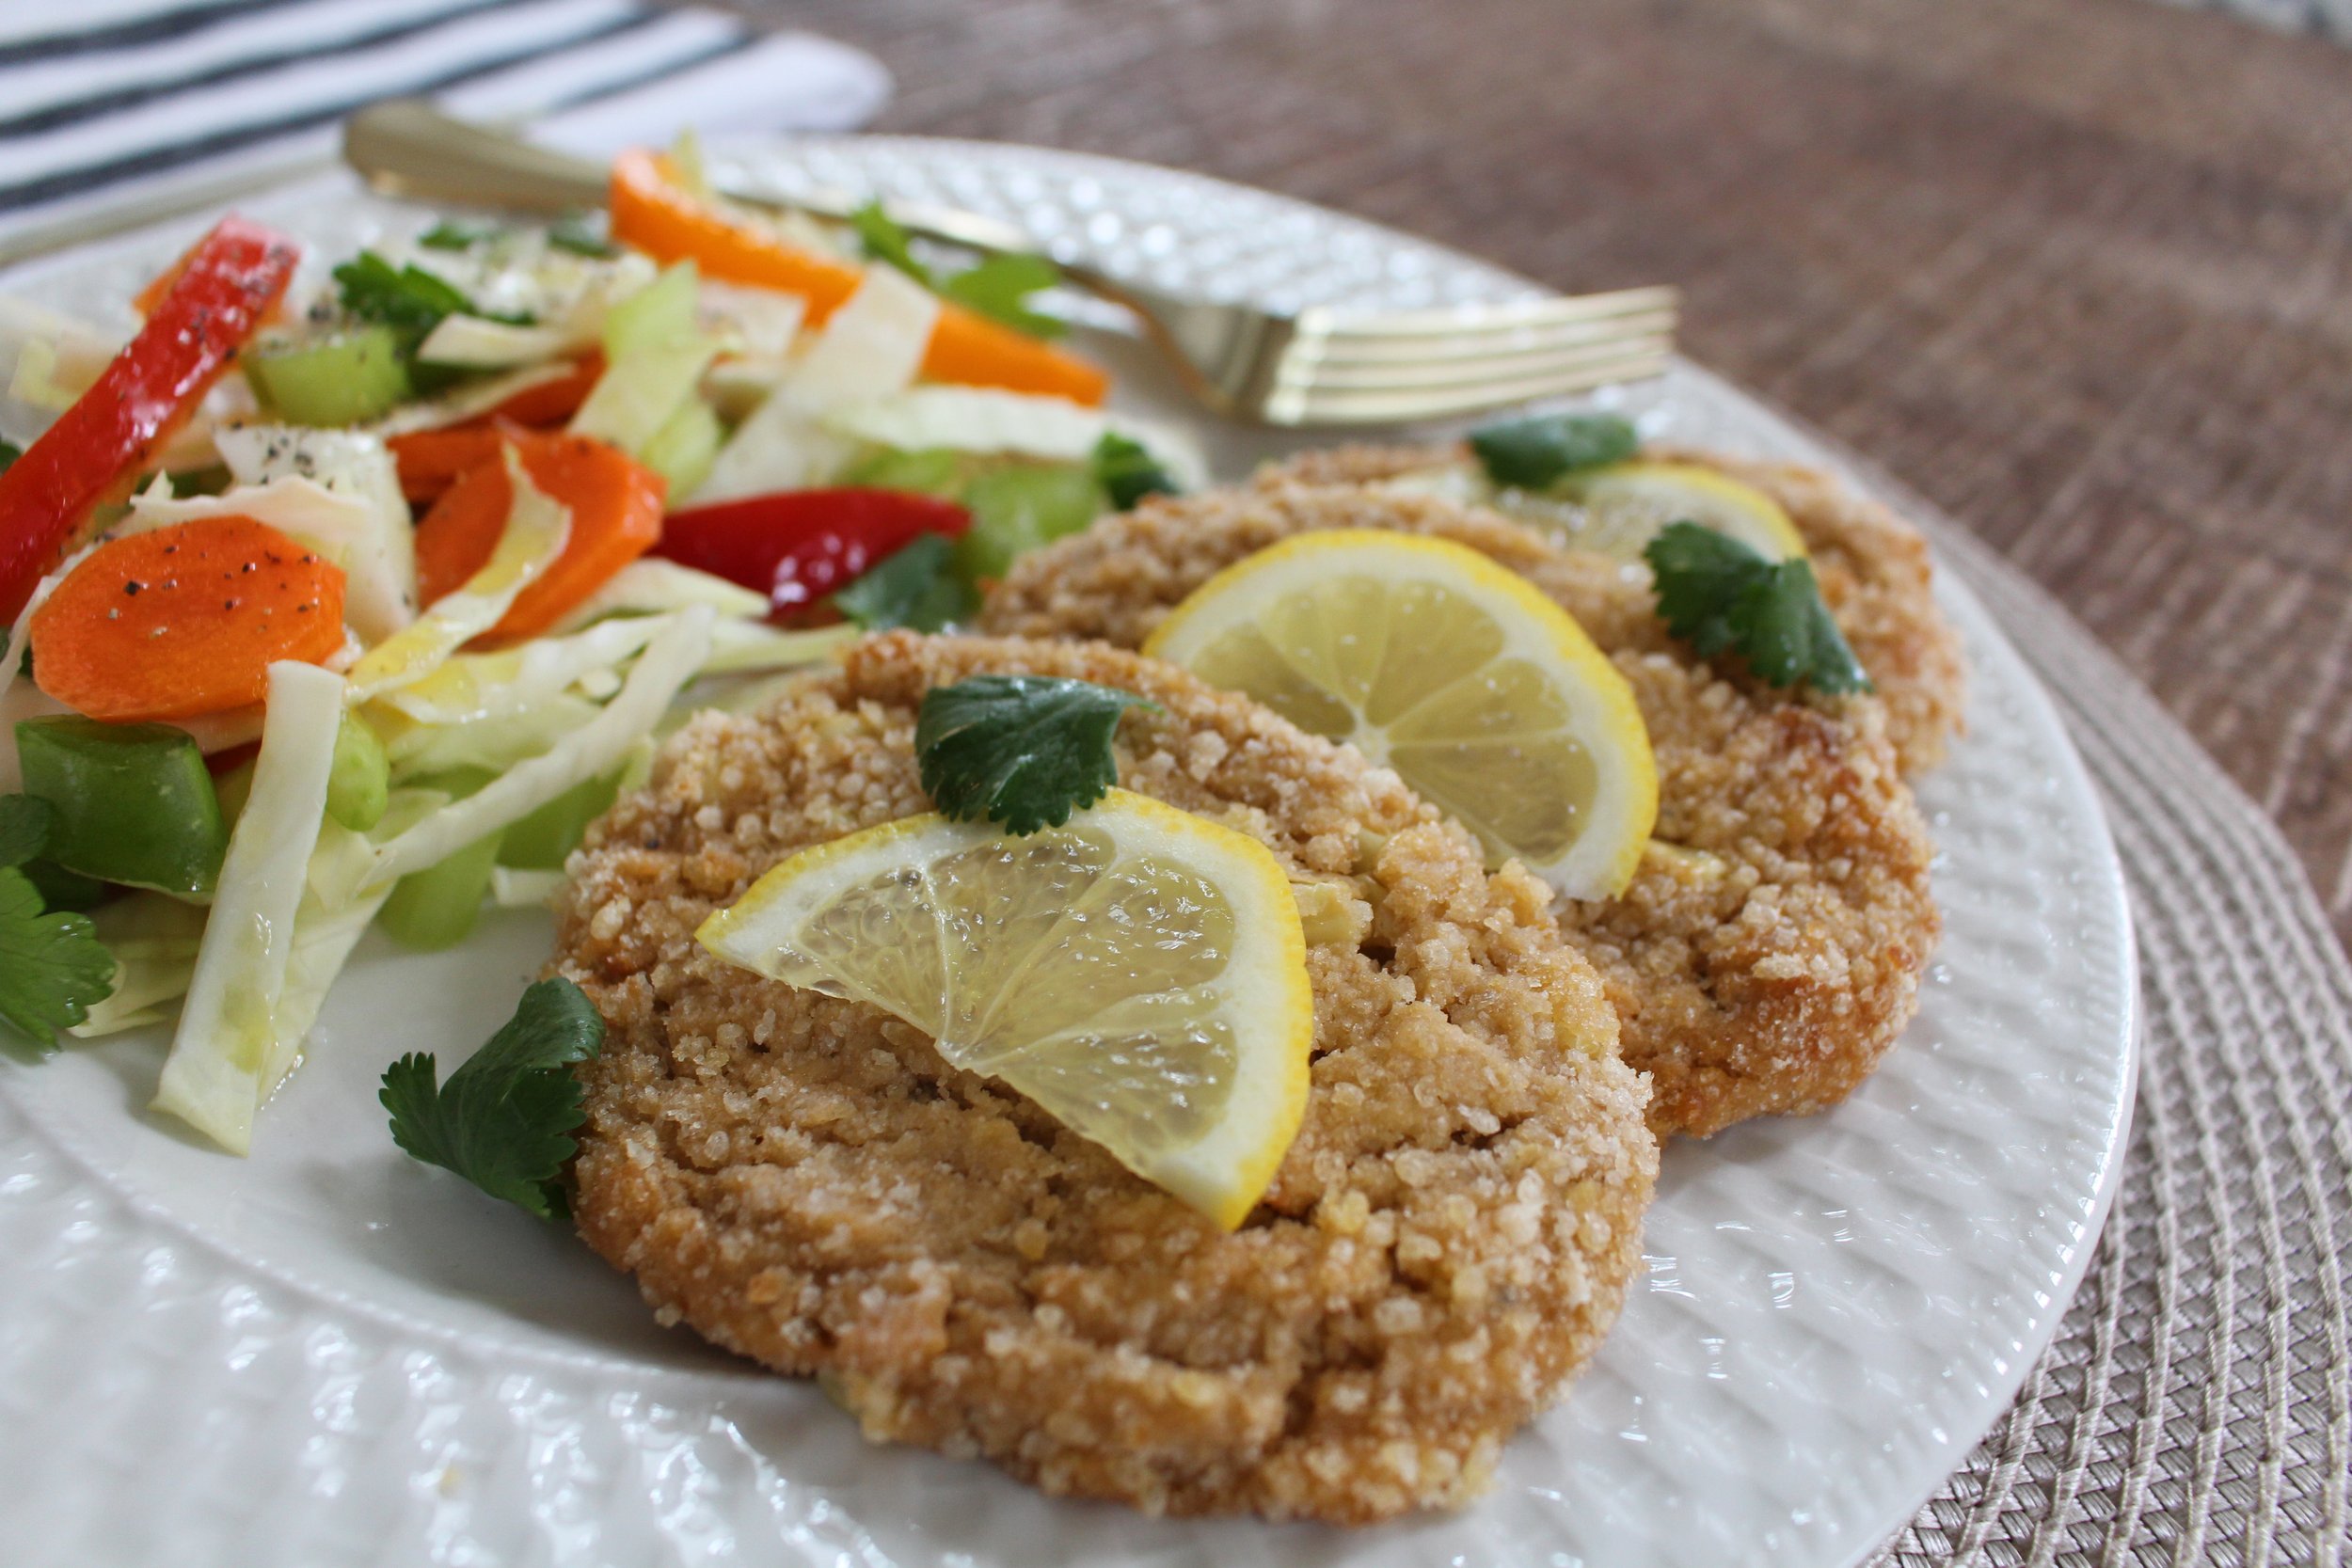 A white plate with corn schnitzel with lemon slices, parsley, and a side salad all on a tan placemat on wood table.